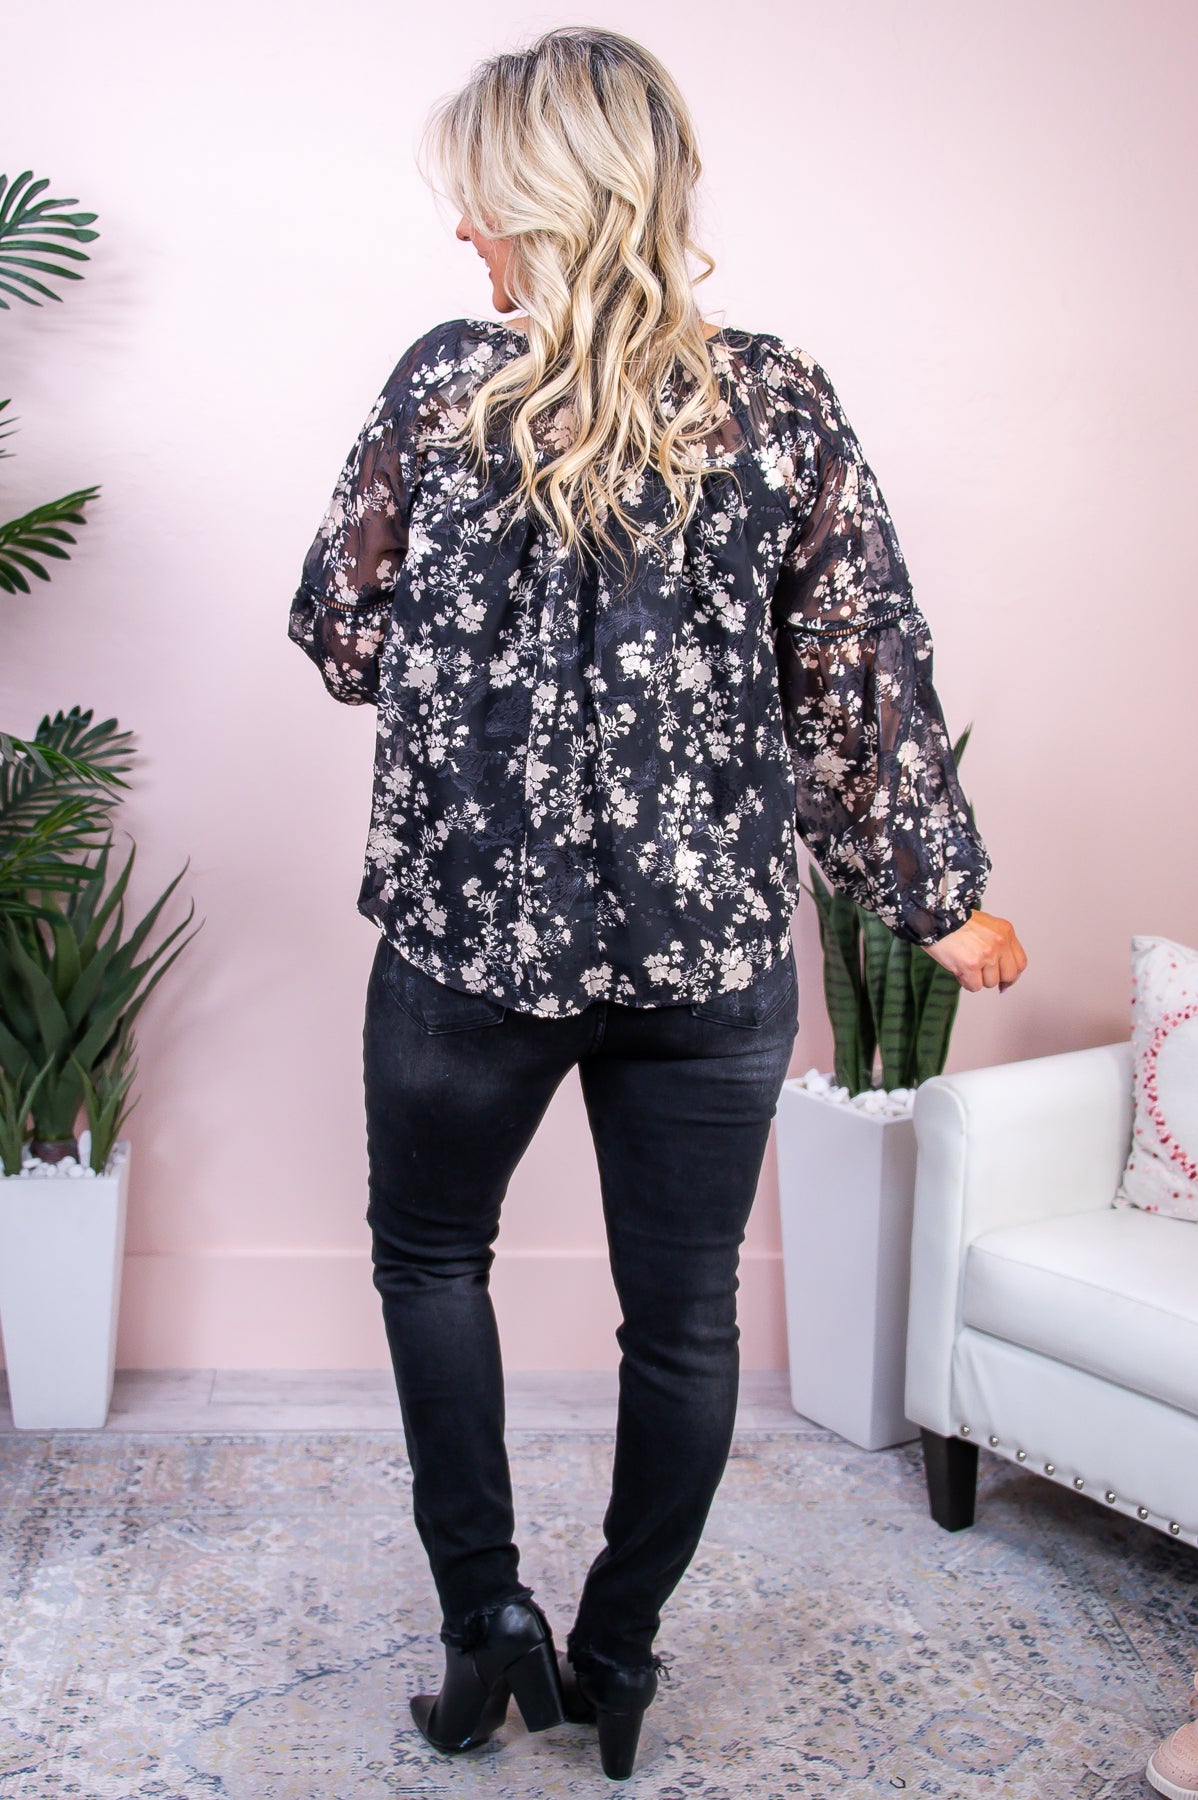 Teach Me To Slow Dance Black/Taupe Floral Top - T8876BK